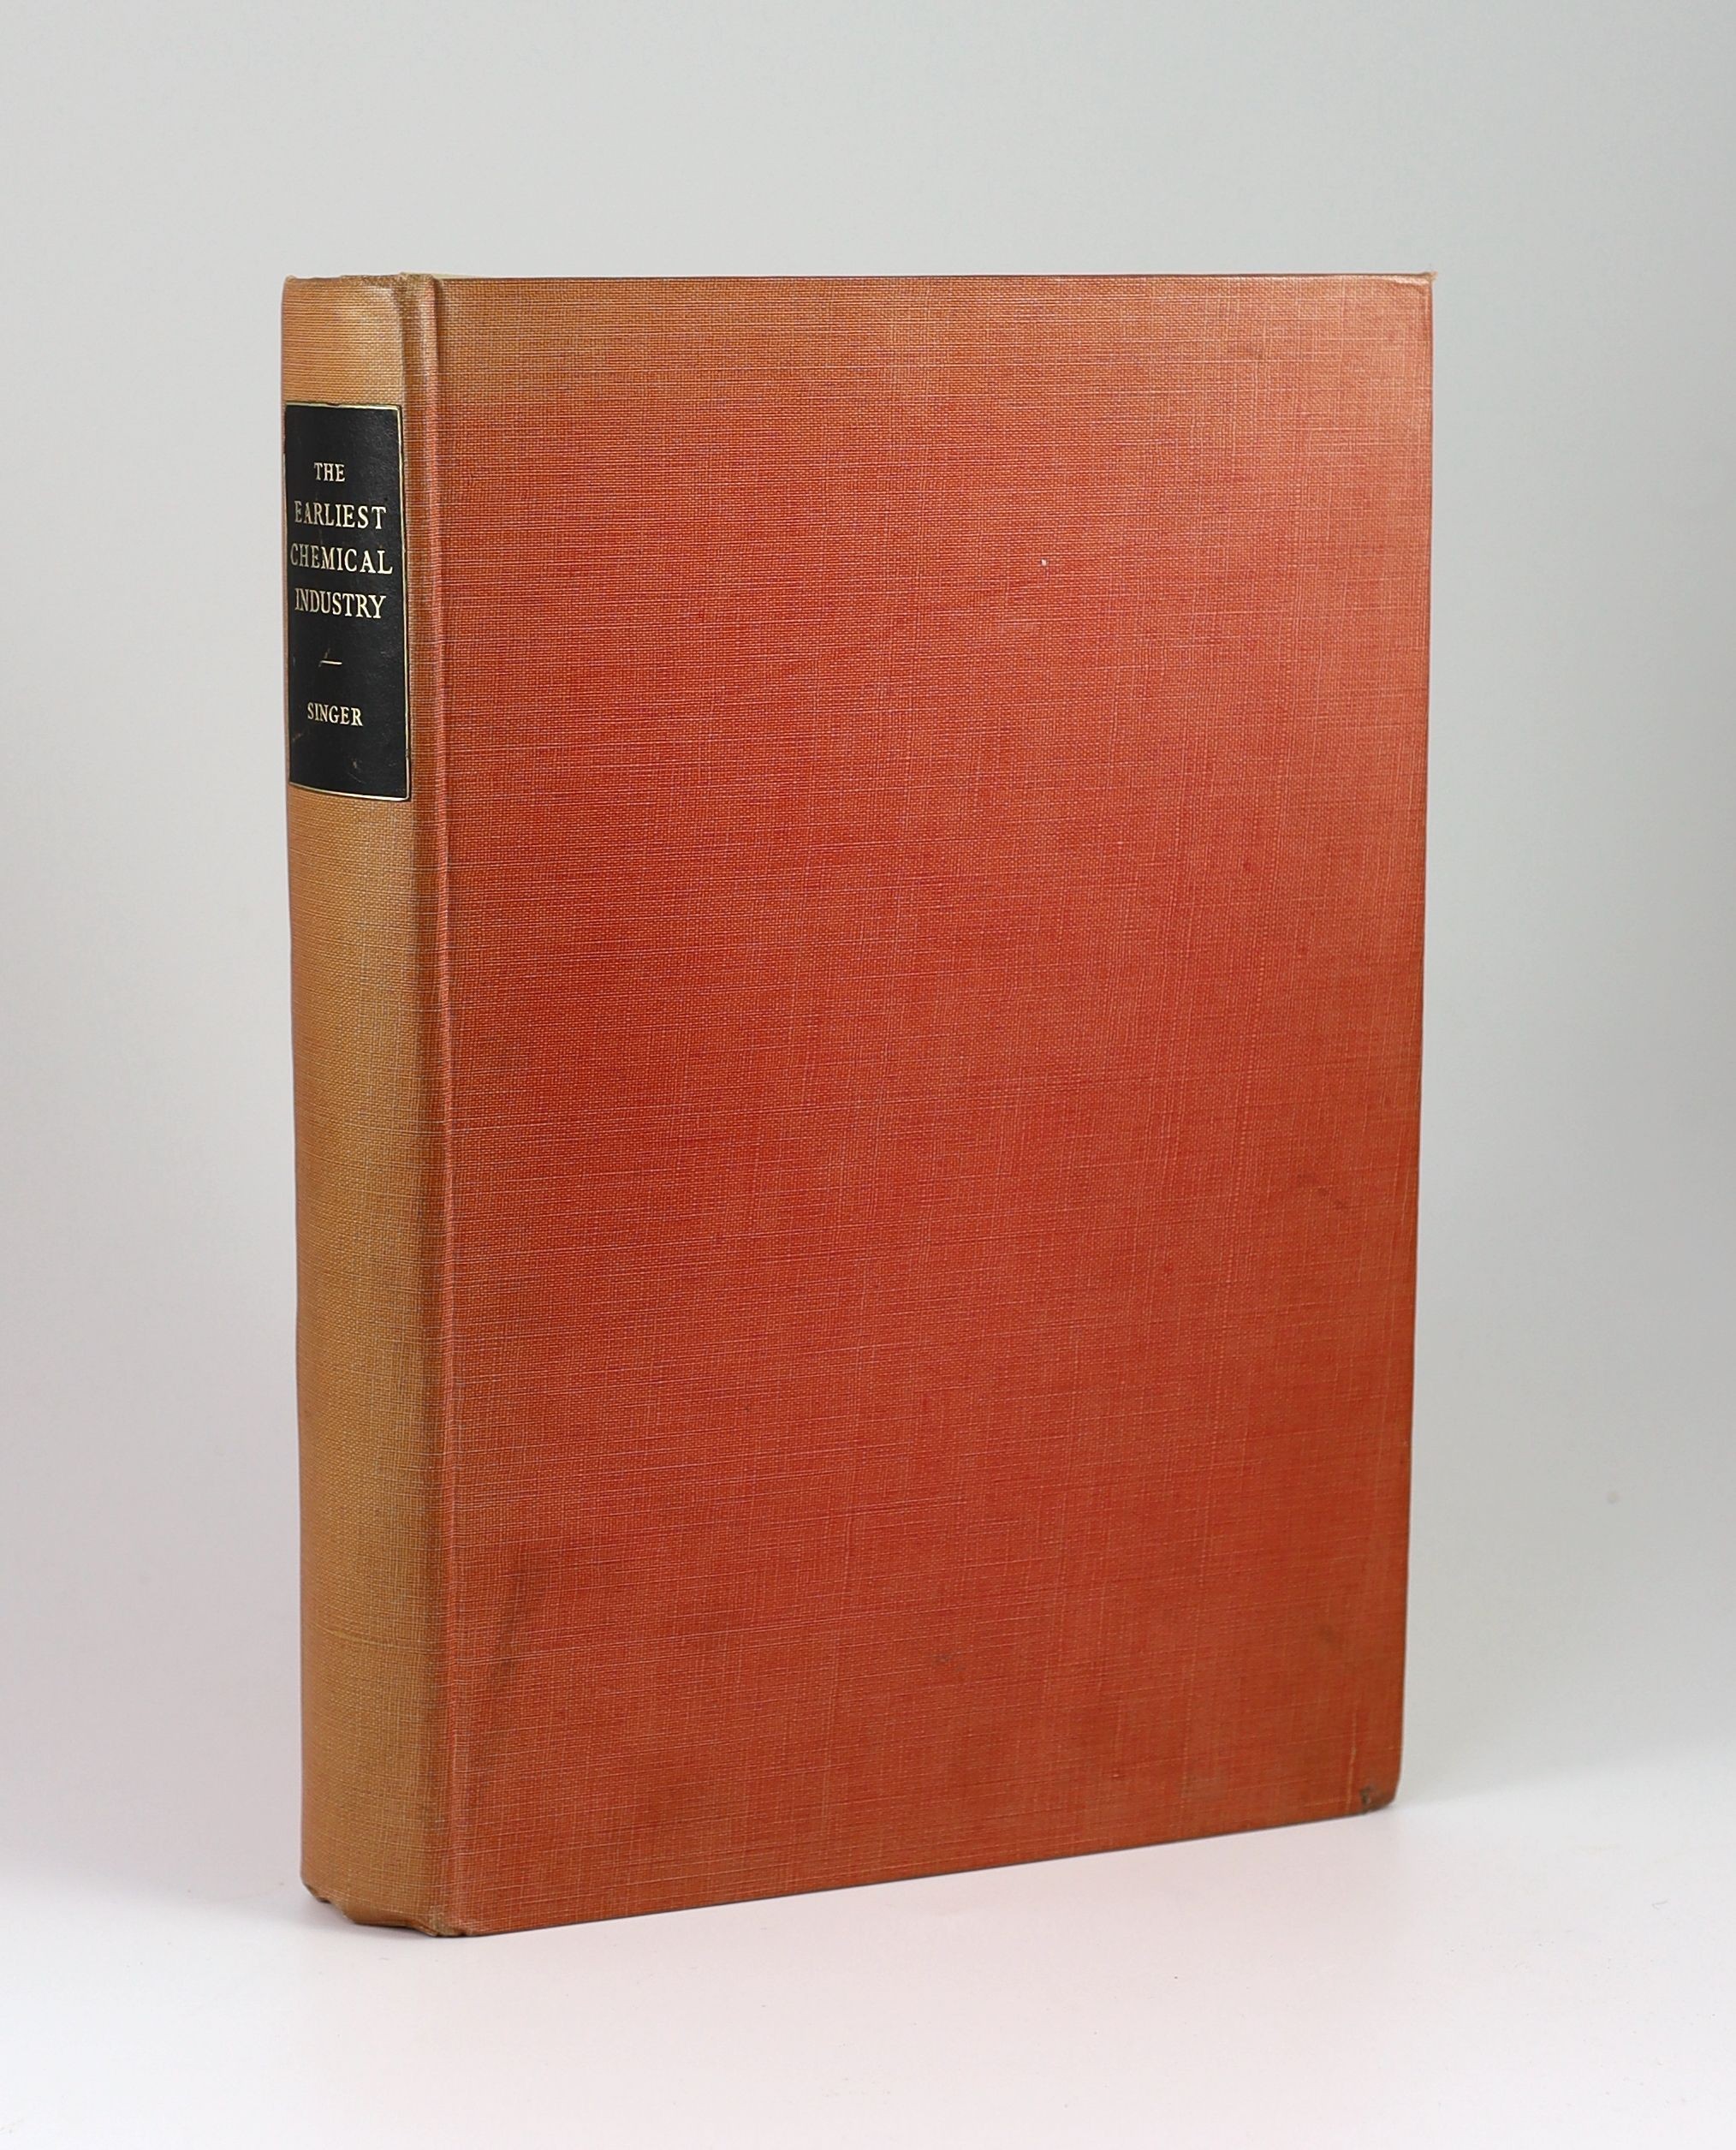 Singer, Charles Joseph - The Earliest Chemical Industries, one of 1000 copies, illustrated by Stephen Gooden, folio, red cloth, with tipped in a/l from the author to John Waterer, 4to, 2pp, from The Athenaeum, dated 5th